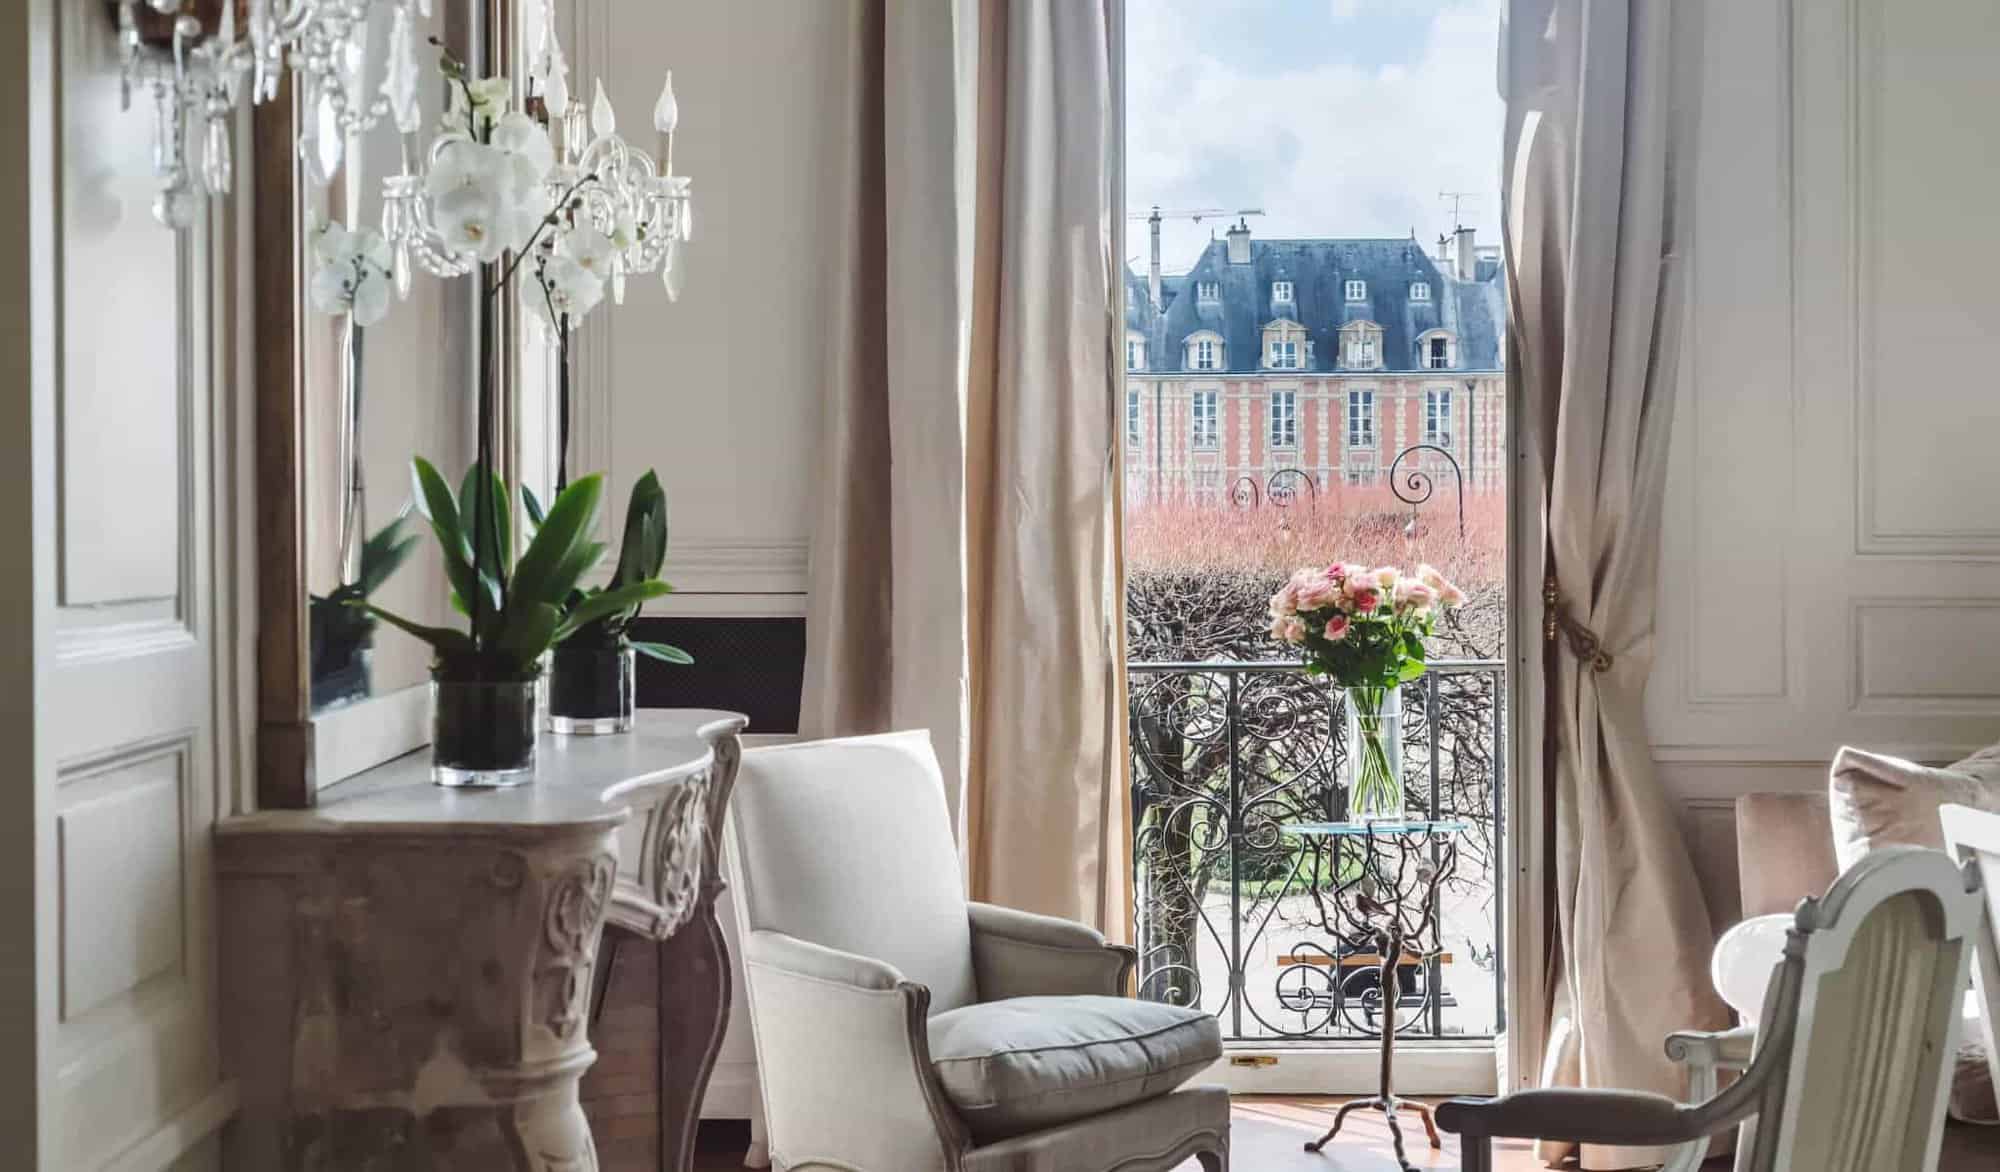 A Parisian living room with a window and balcony overlooking the Place des Vosges iconic orange buildings.